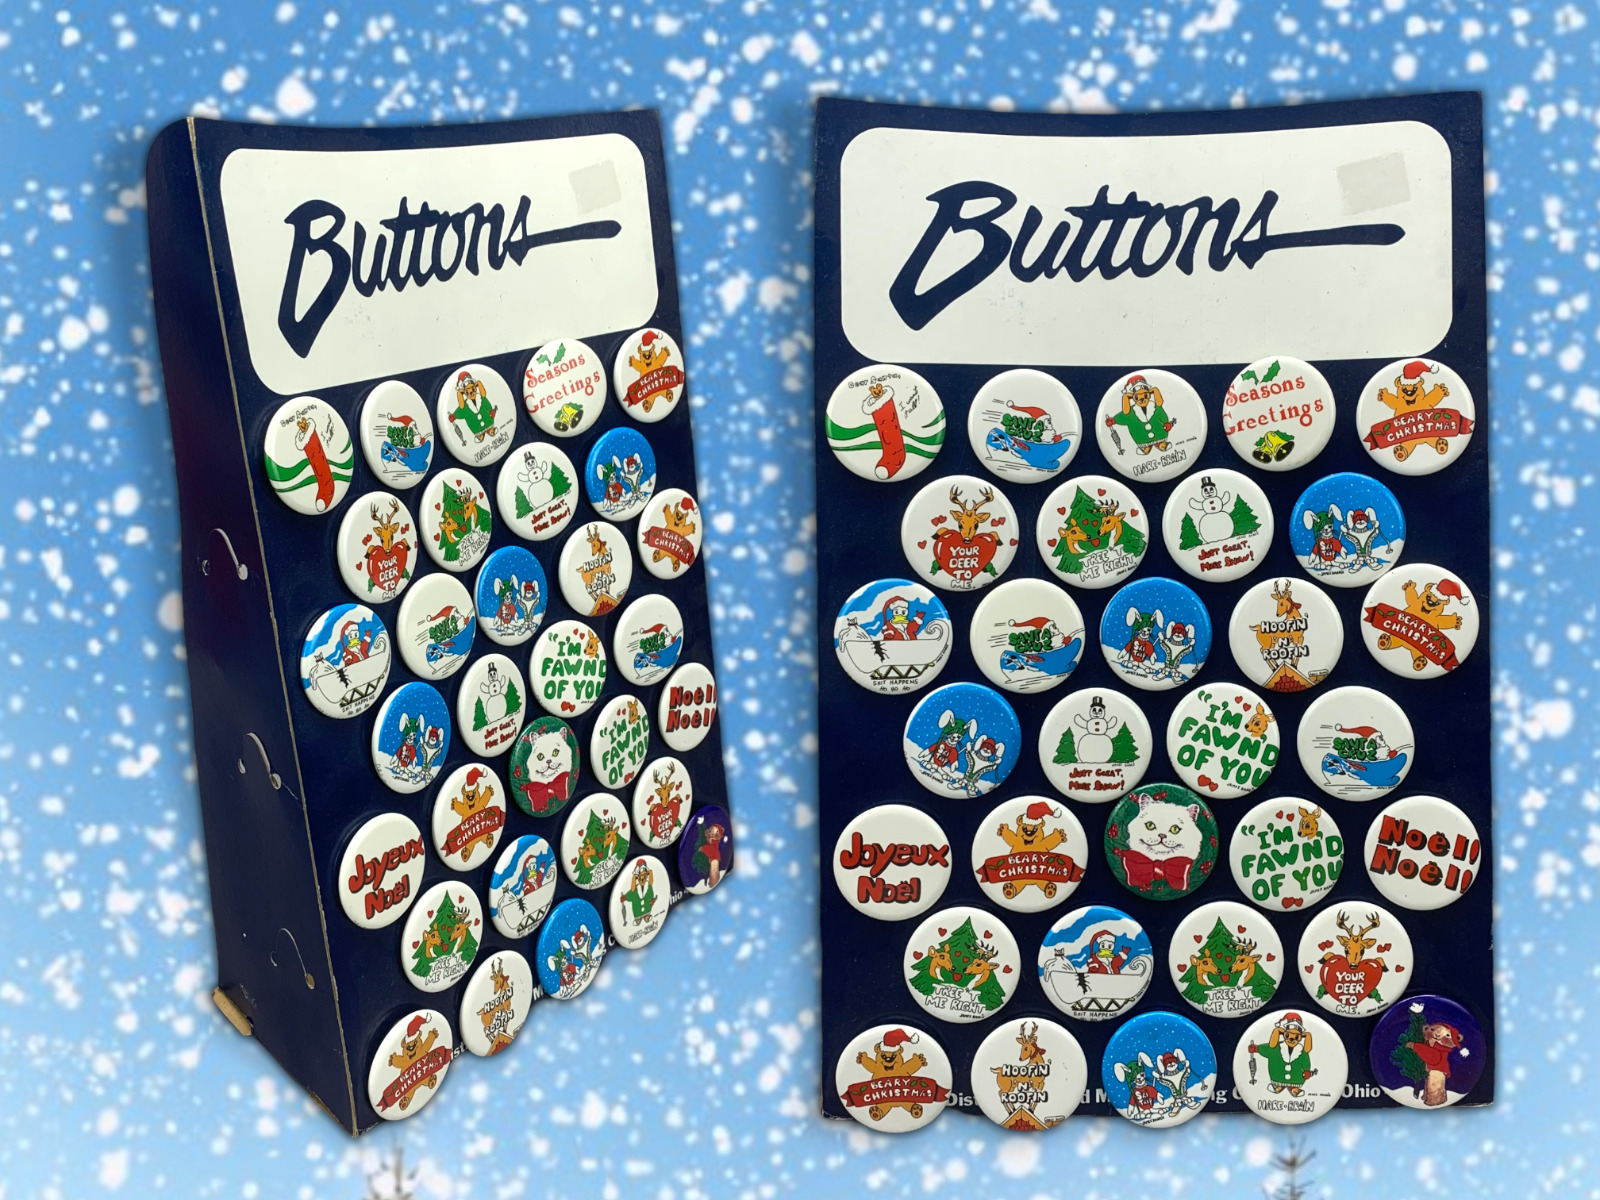 1980s Vintage Christmas Pinback Button Display Set of 32 Holiday Buttons by D&J 